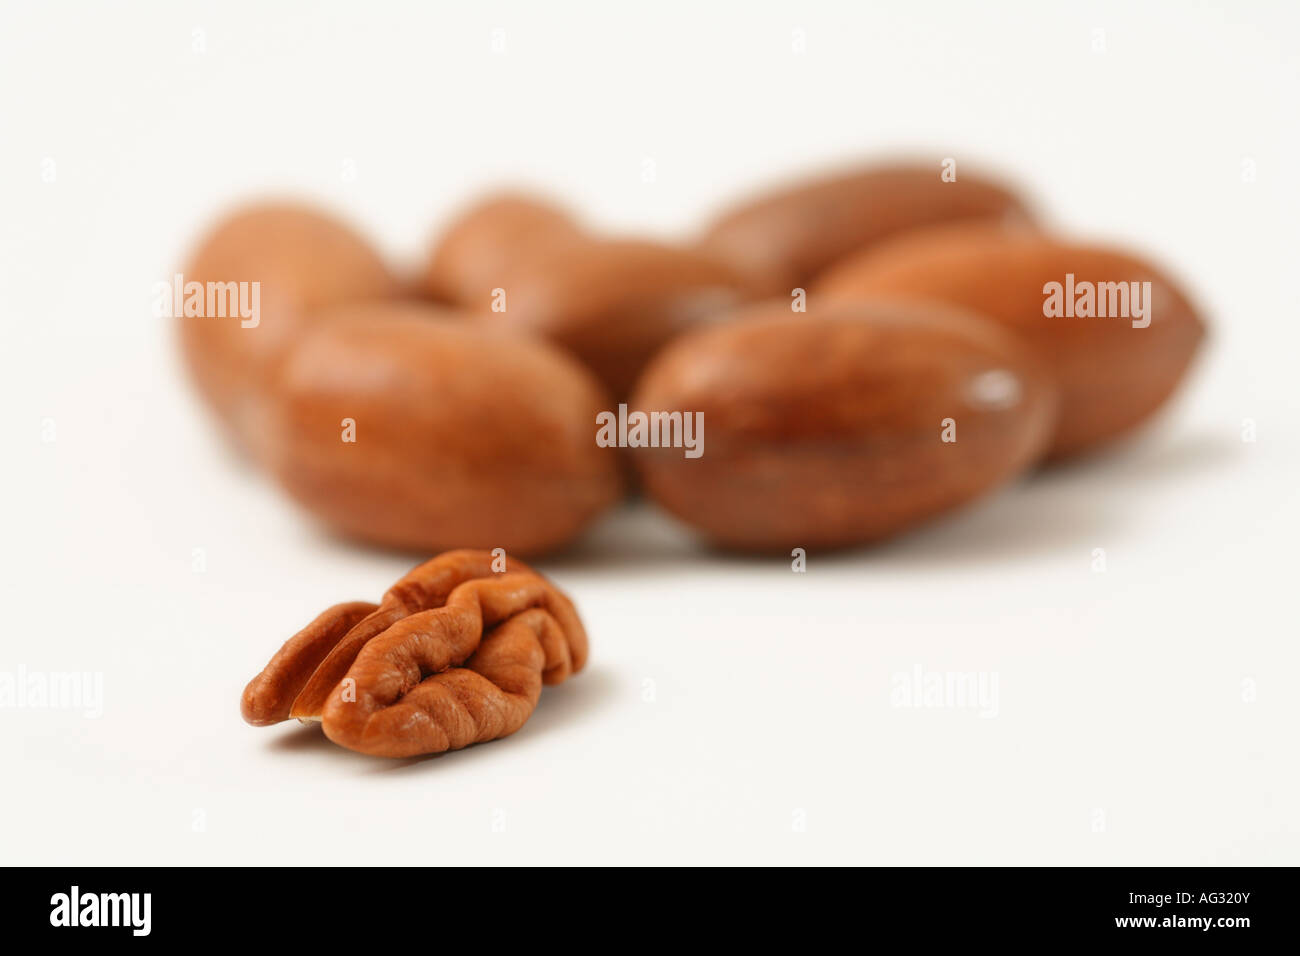 pecan nuts one shelled some in shells Carya illinoinensis, commonly misspelled illinoensis Stock Photo